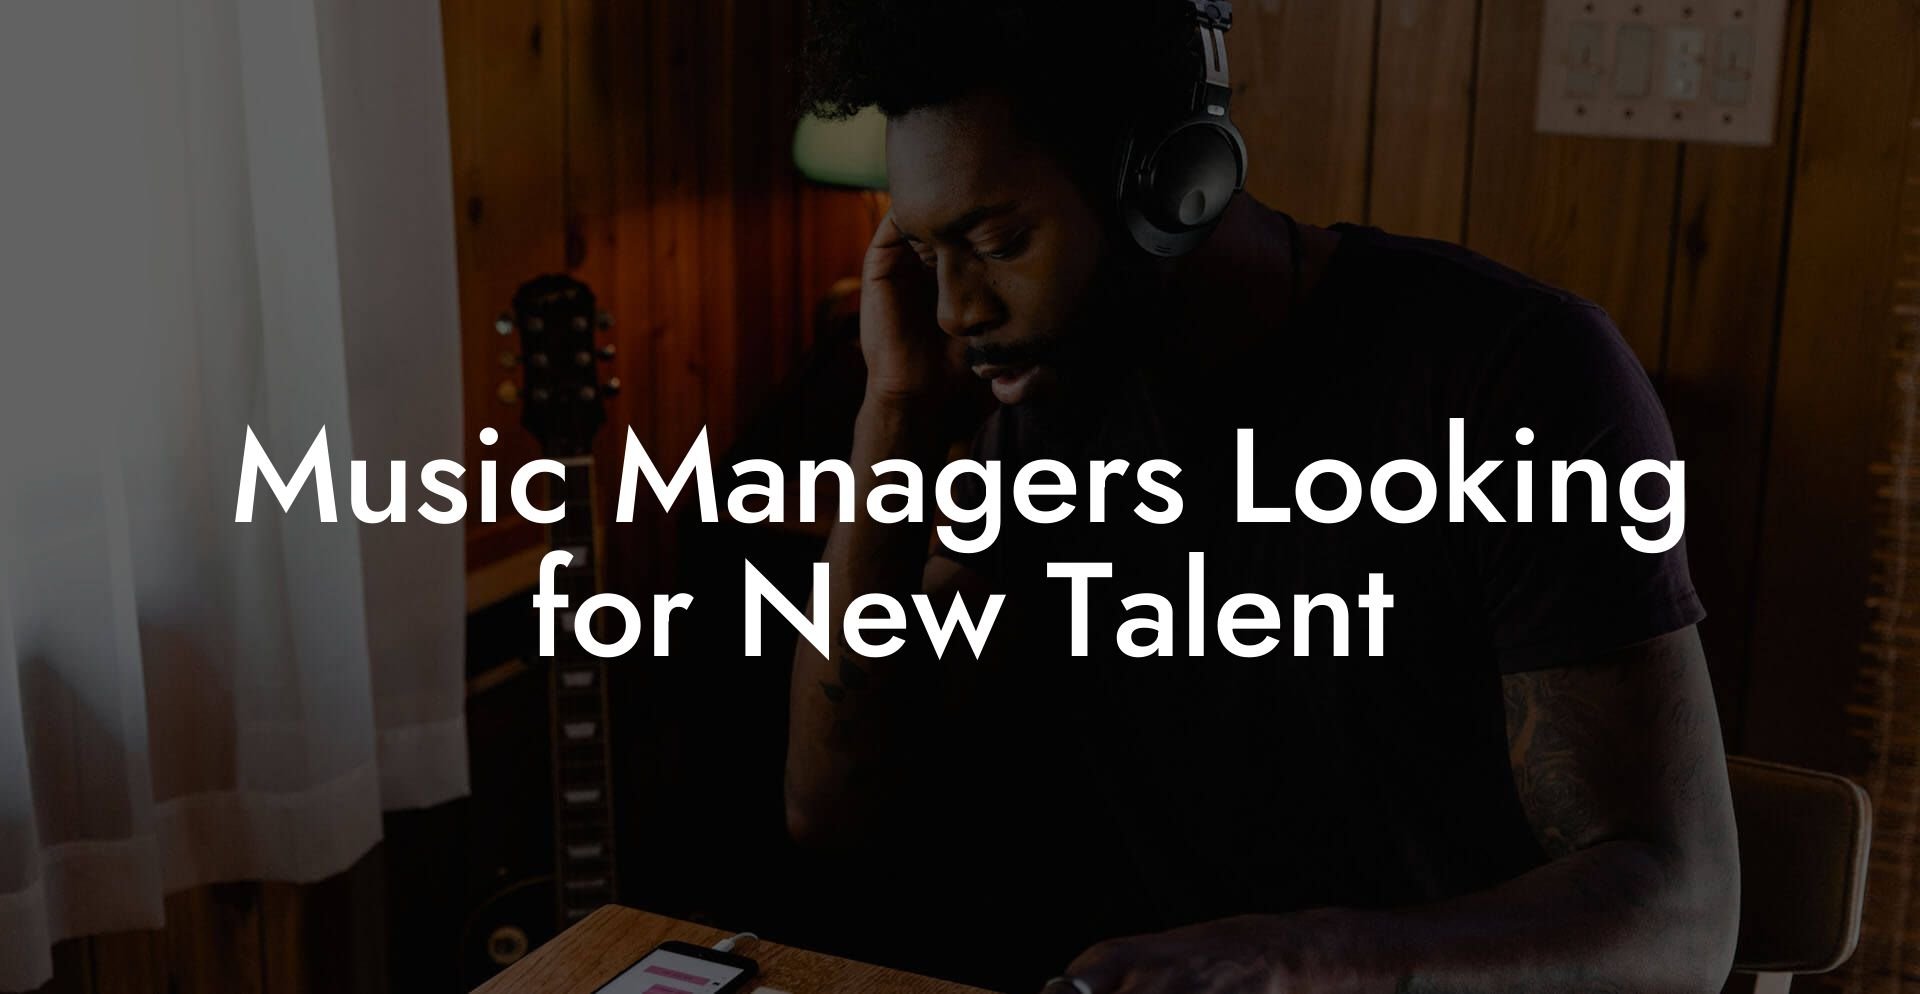 Music Managers Looking for New Talent